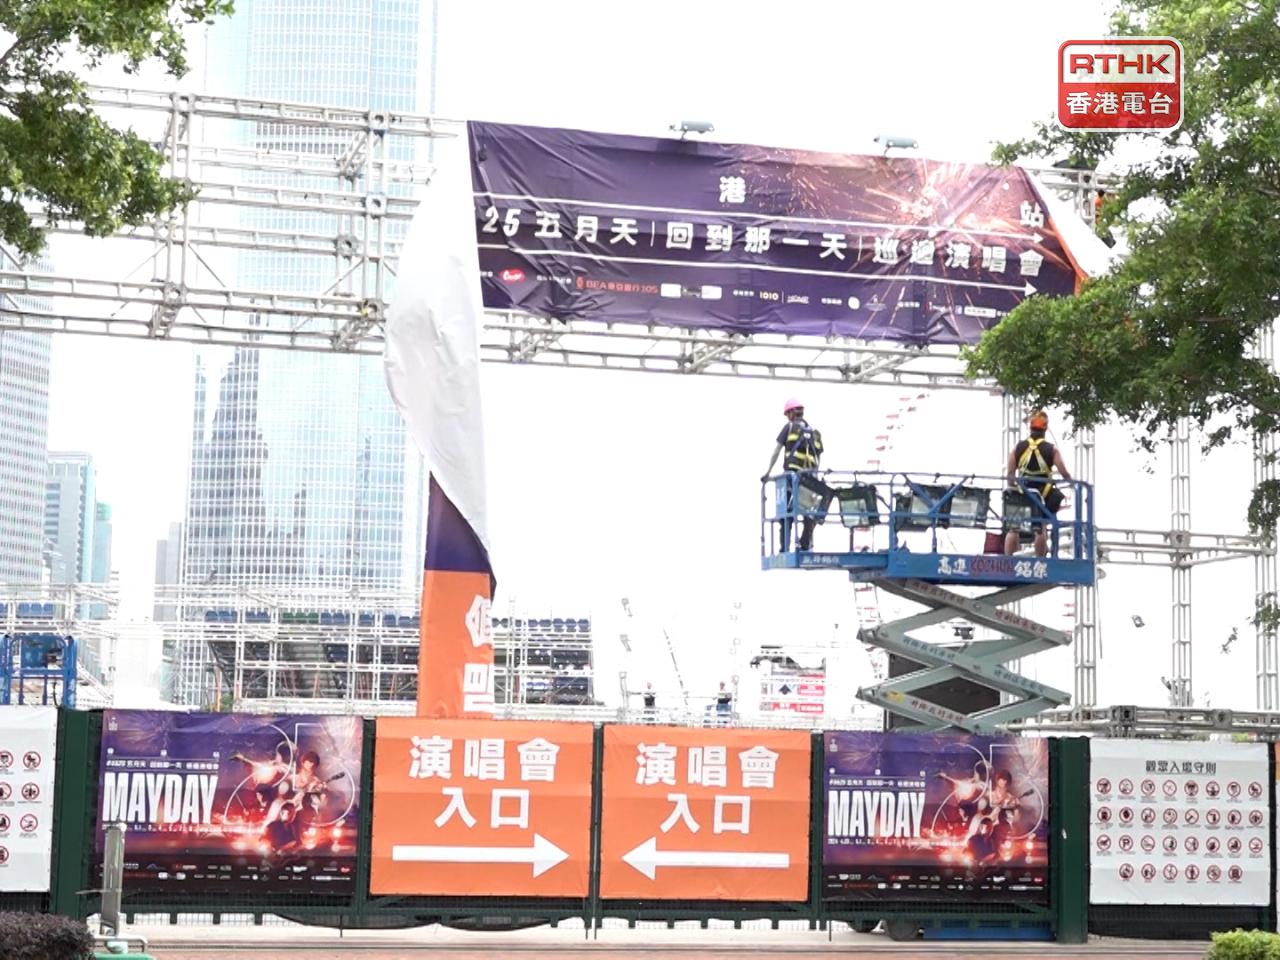 Worker falls from height while dismantling stage